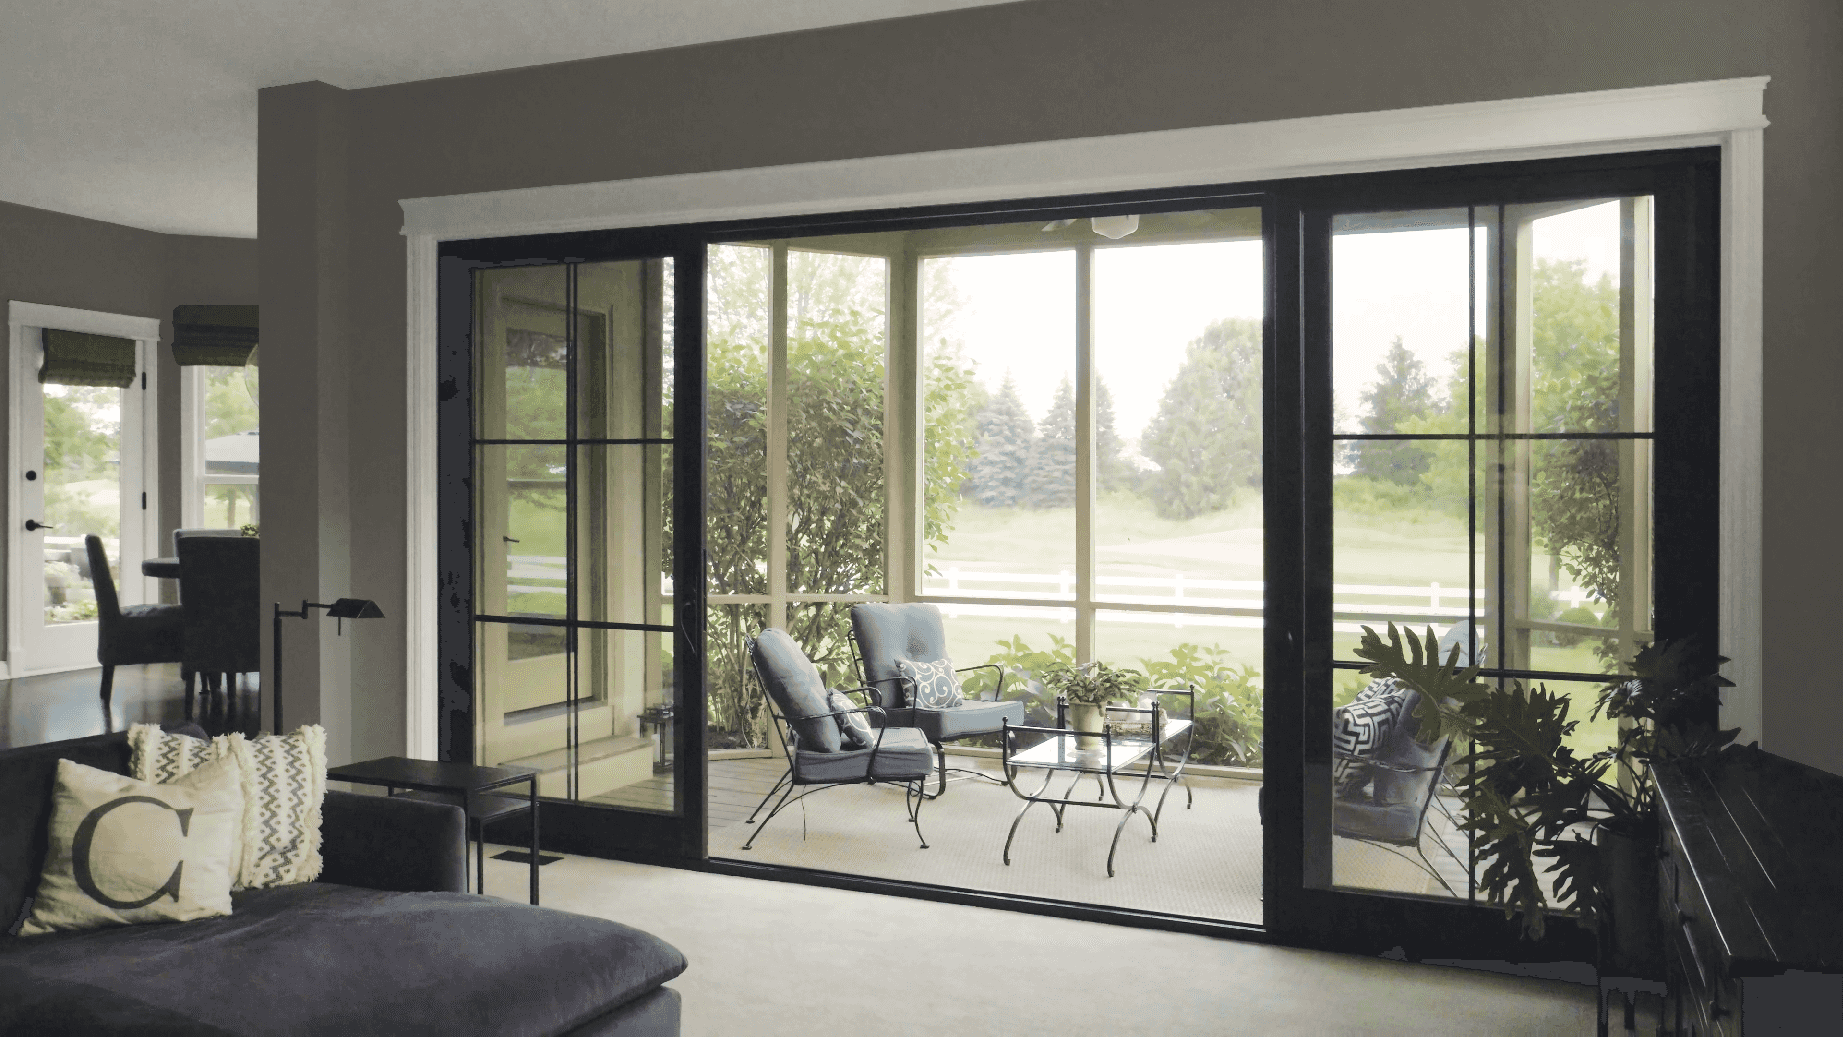 Interior living room and porch image featuring an Infinity Sliding French Door in Ebony interior finish with Matte Black hardware.